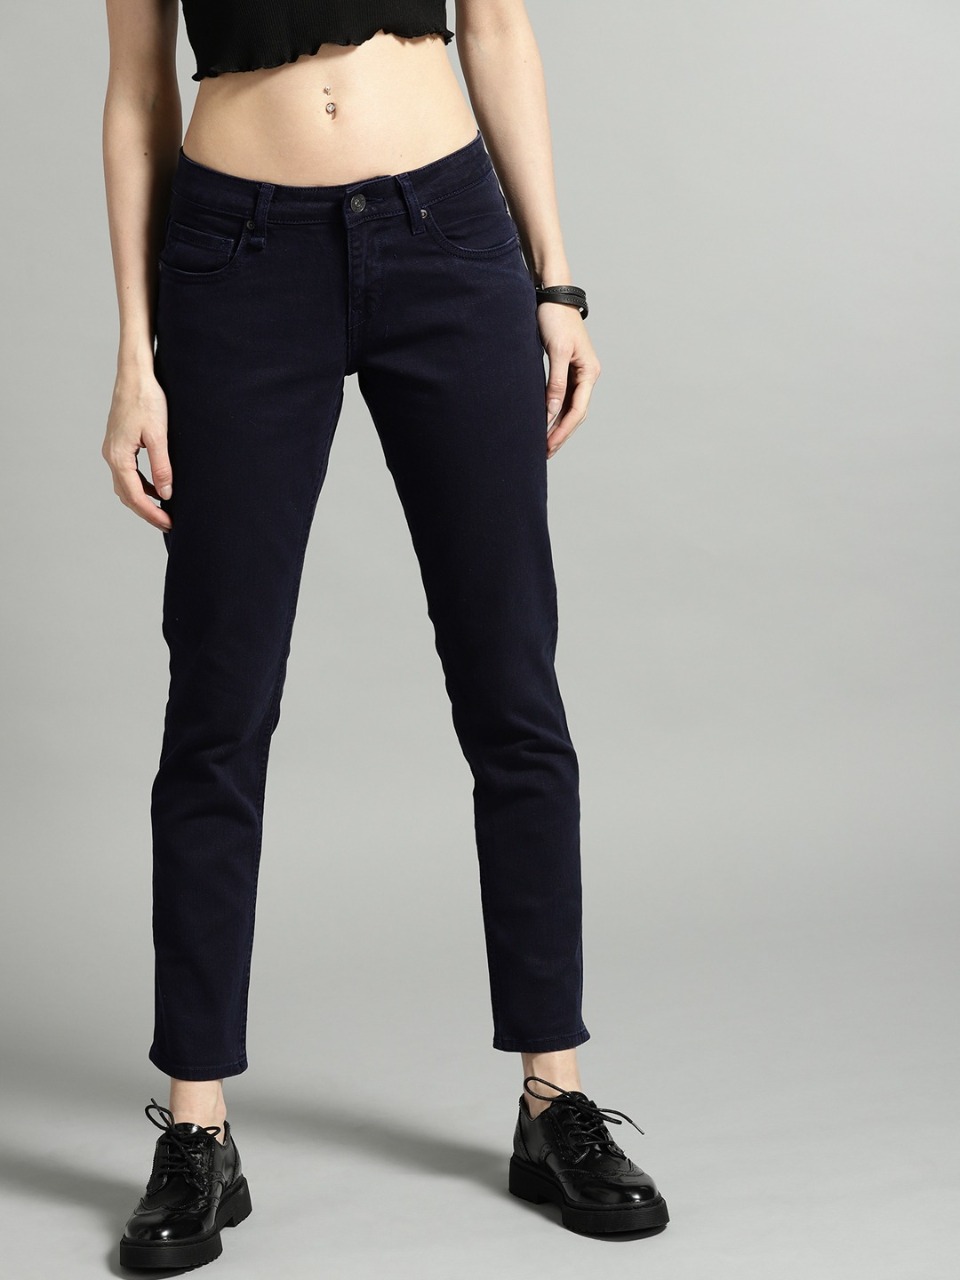 Jeans & Trousers | Roadster Jeans, Mid Waist | Freeup